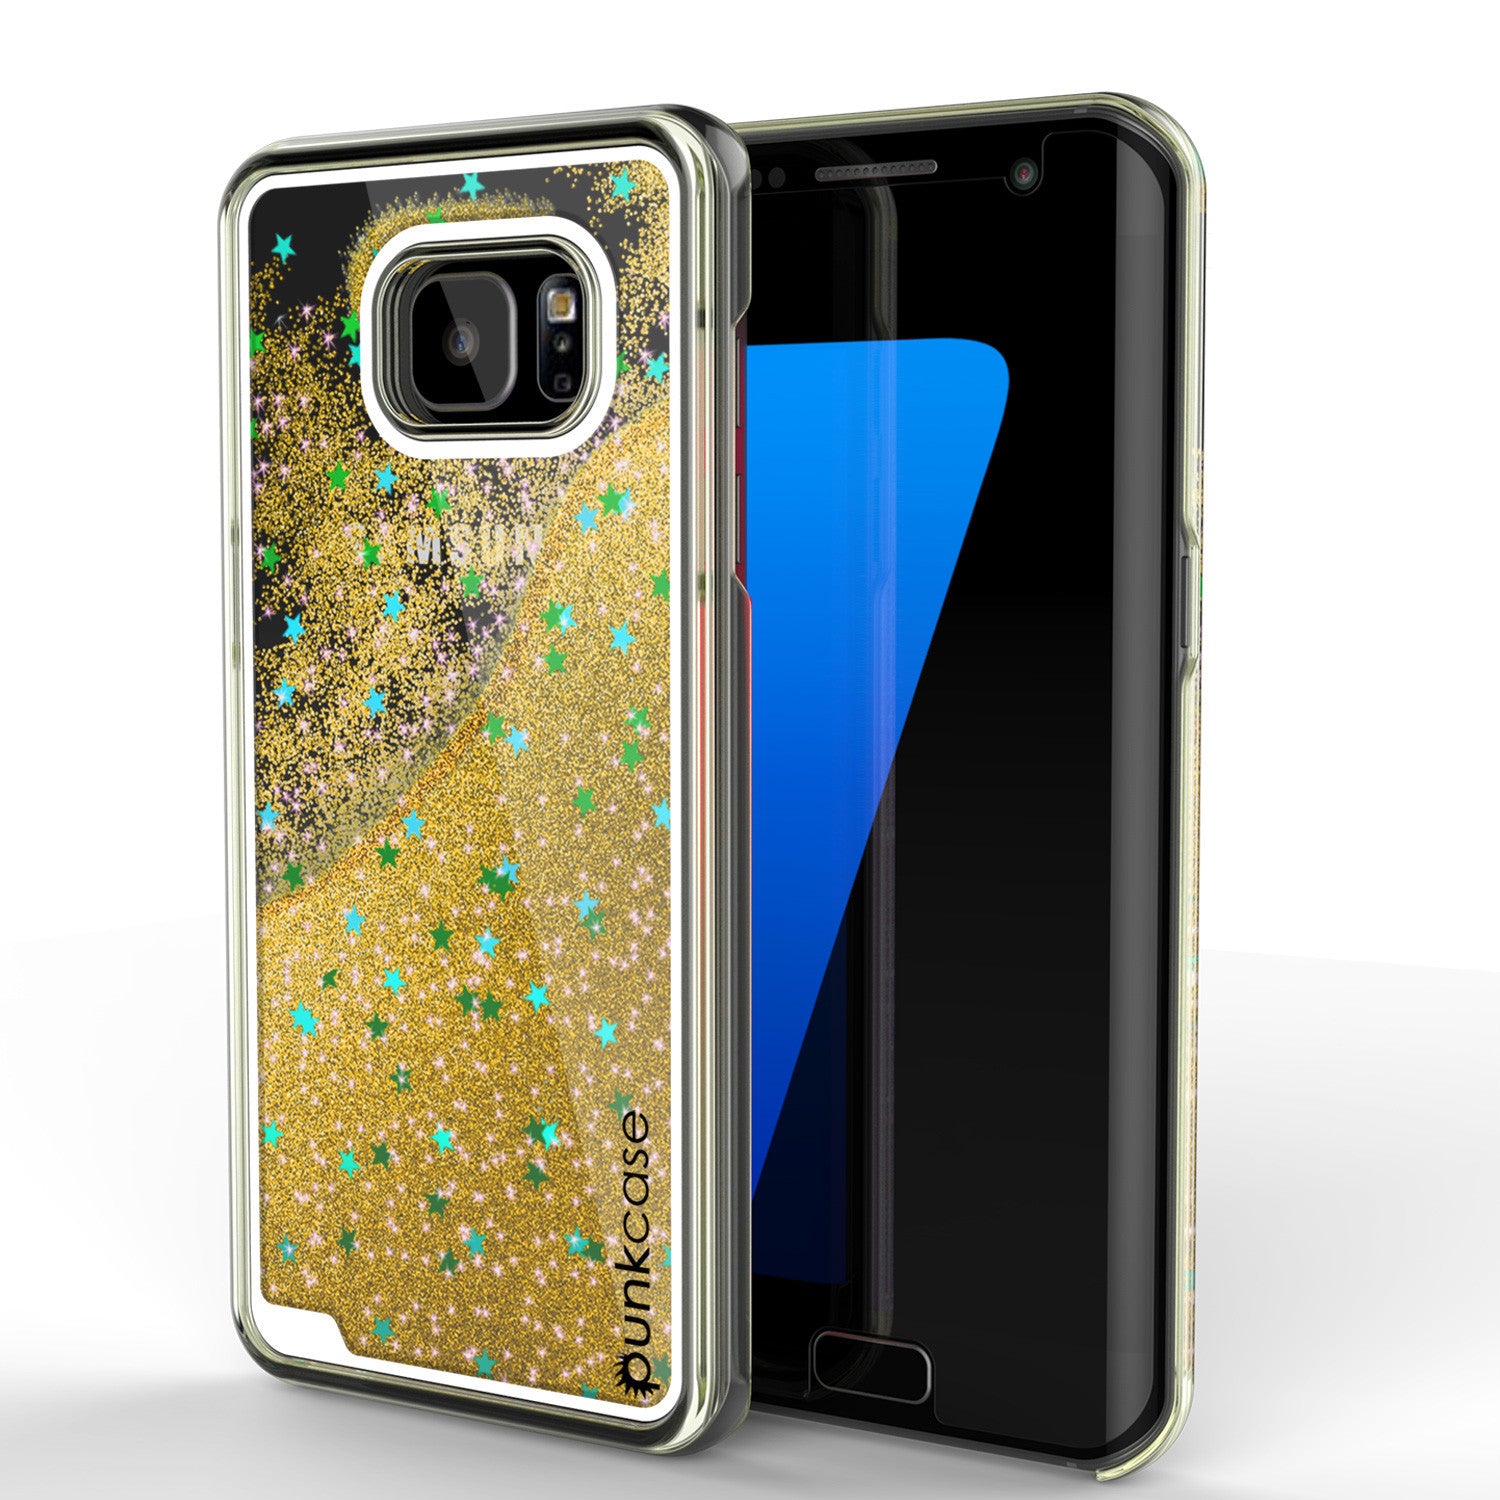 Samsung Galaxy S7 Edge Case, Punkcase [Liquid Gold Series] Protective Dual Layer Floating Glitter Cover + PunkShield Screen Protector